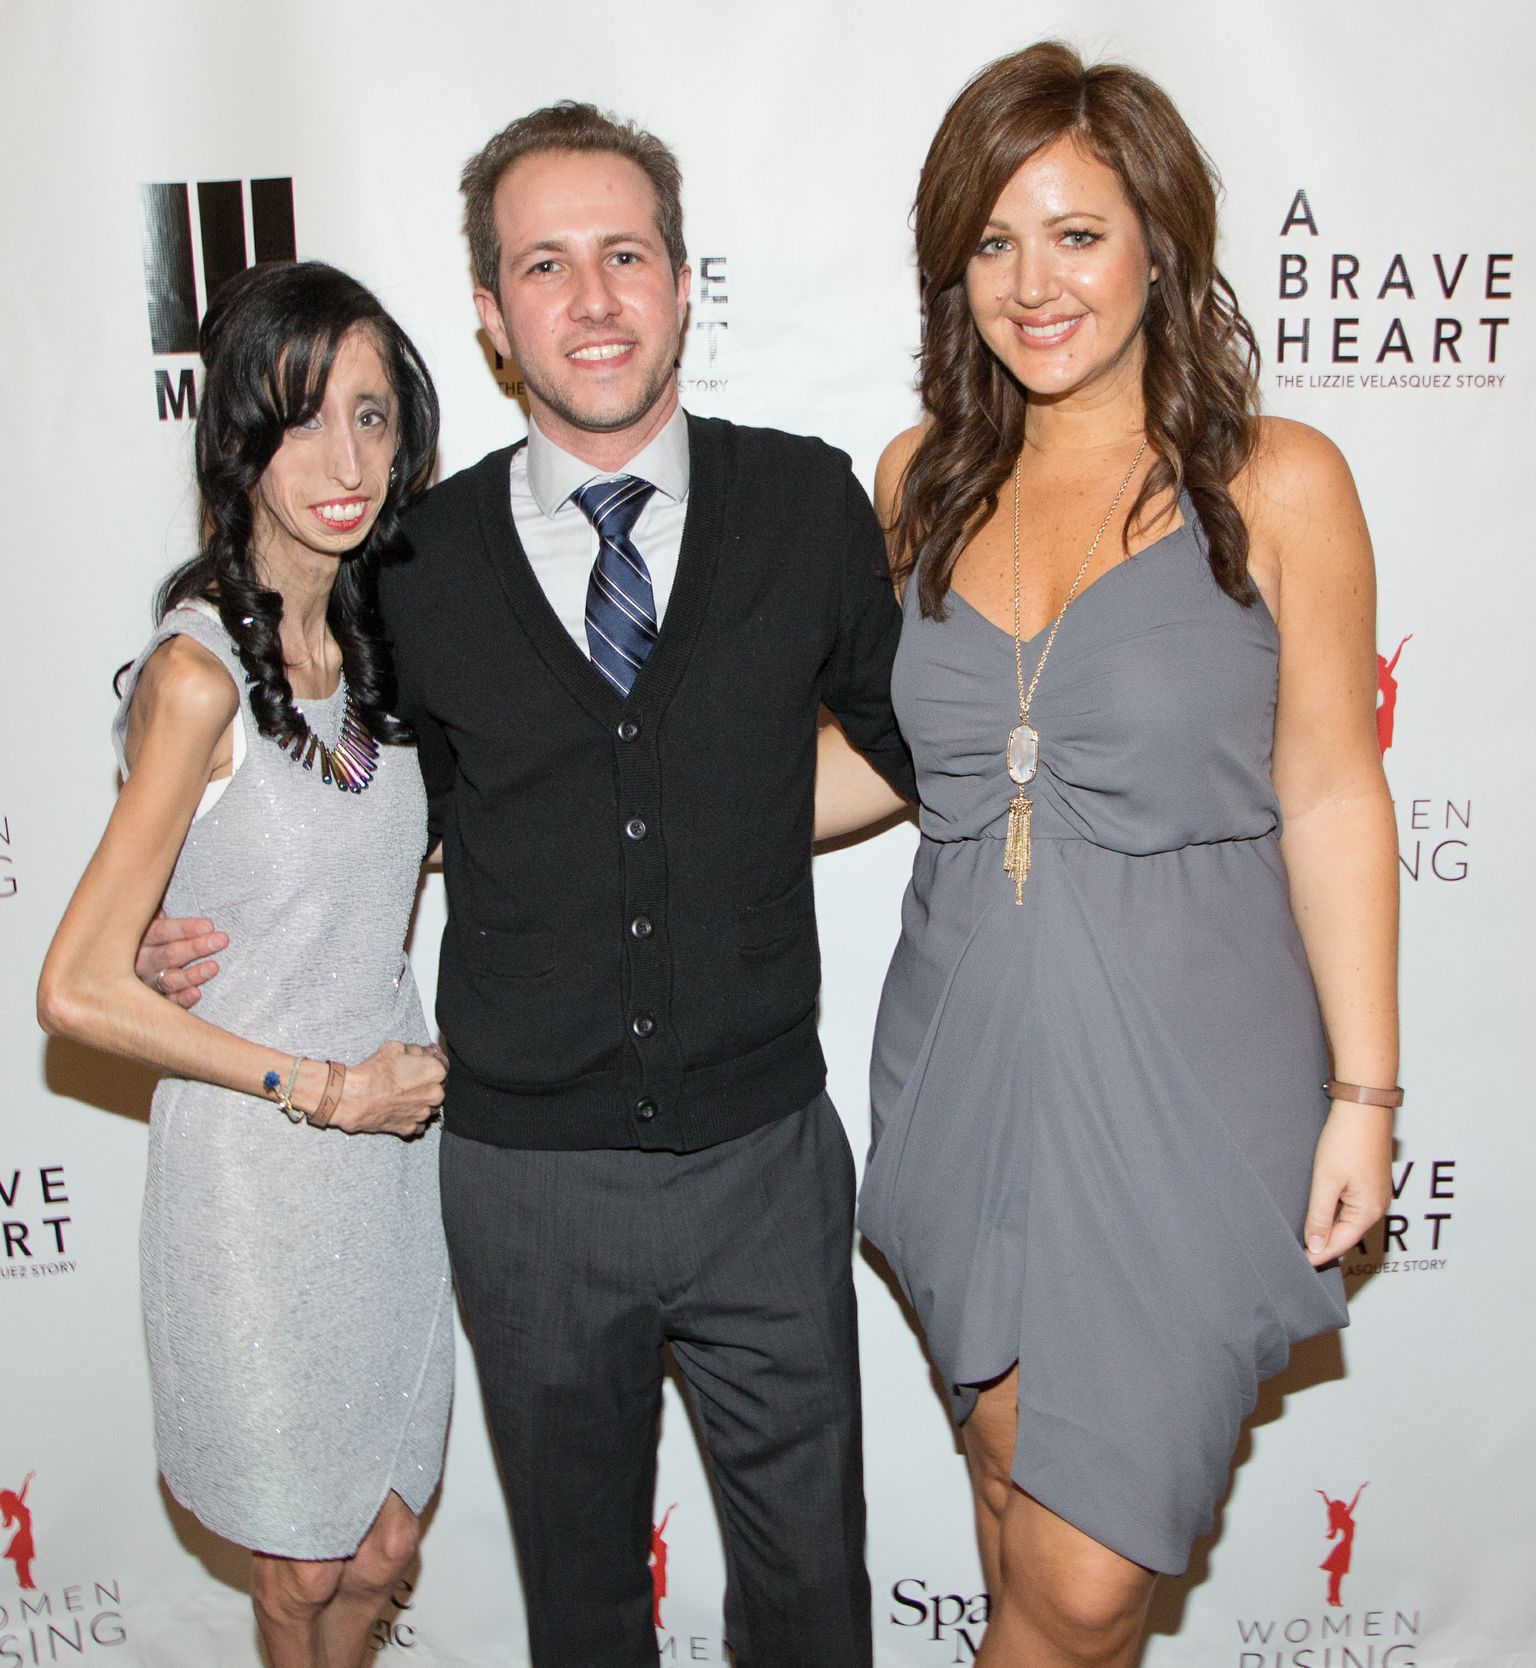 At the SXSW premiere of A Brave Heart: The Lizzie Velasquez Story with Lizzie Velasquez and Director Sara Bordo